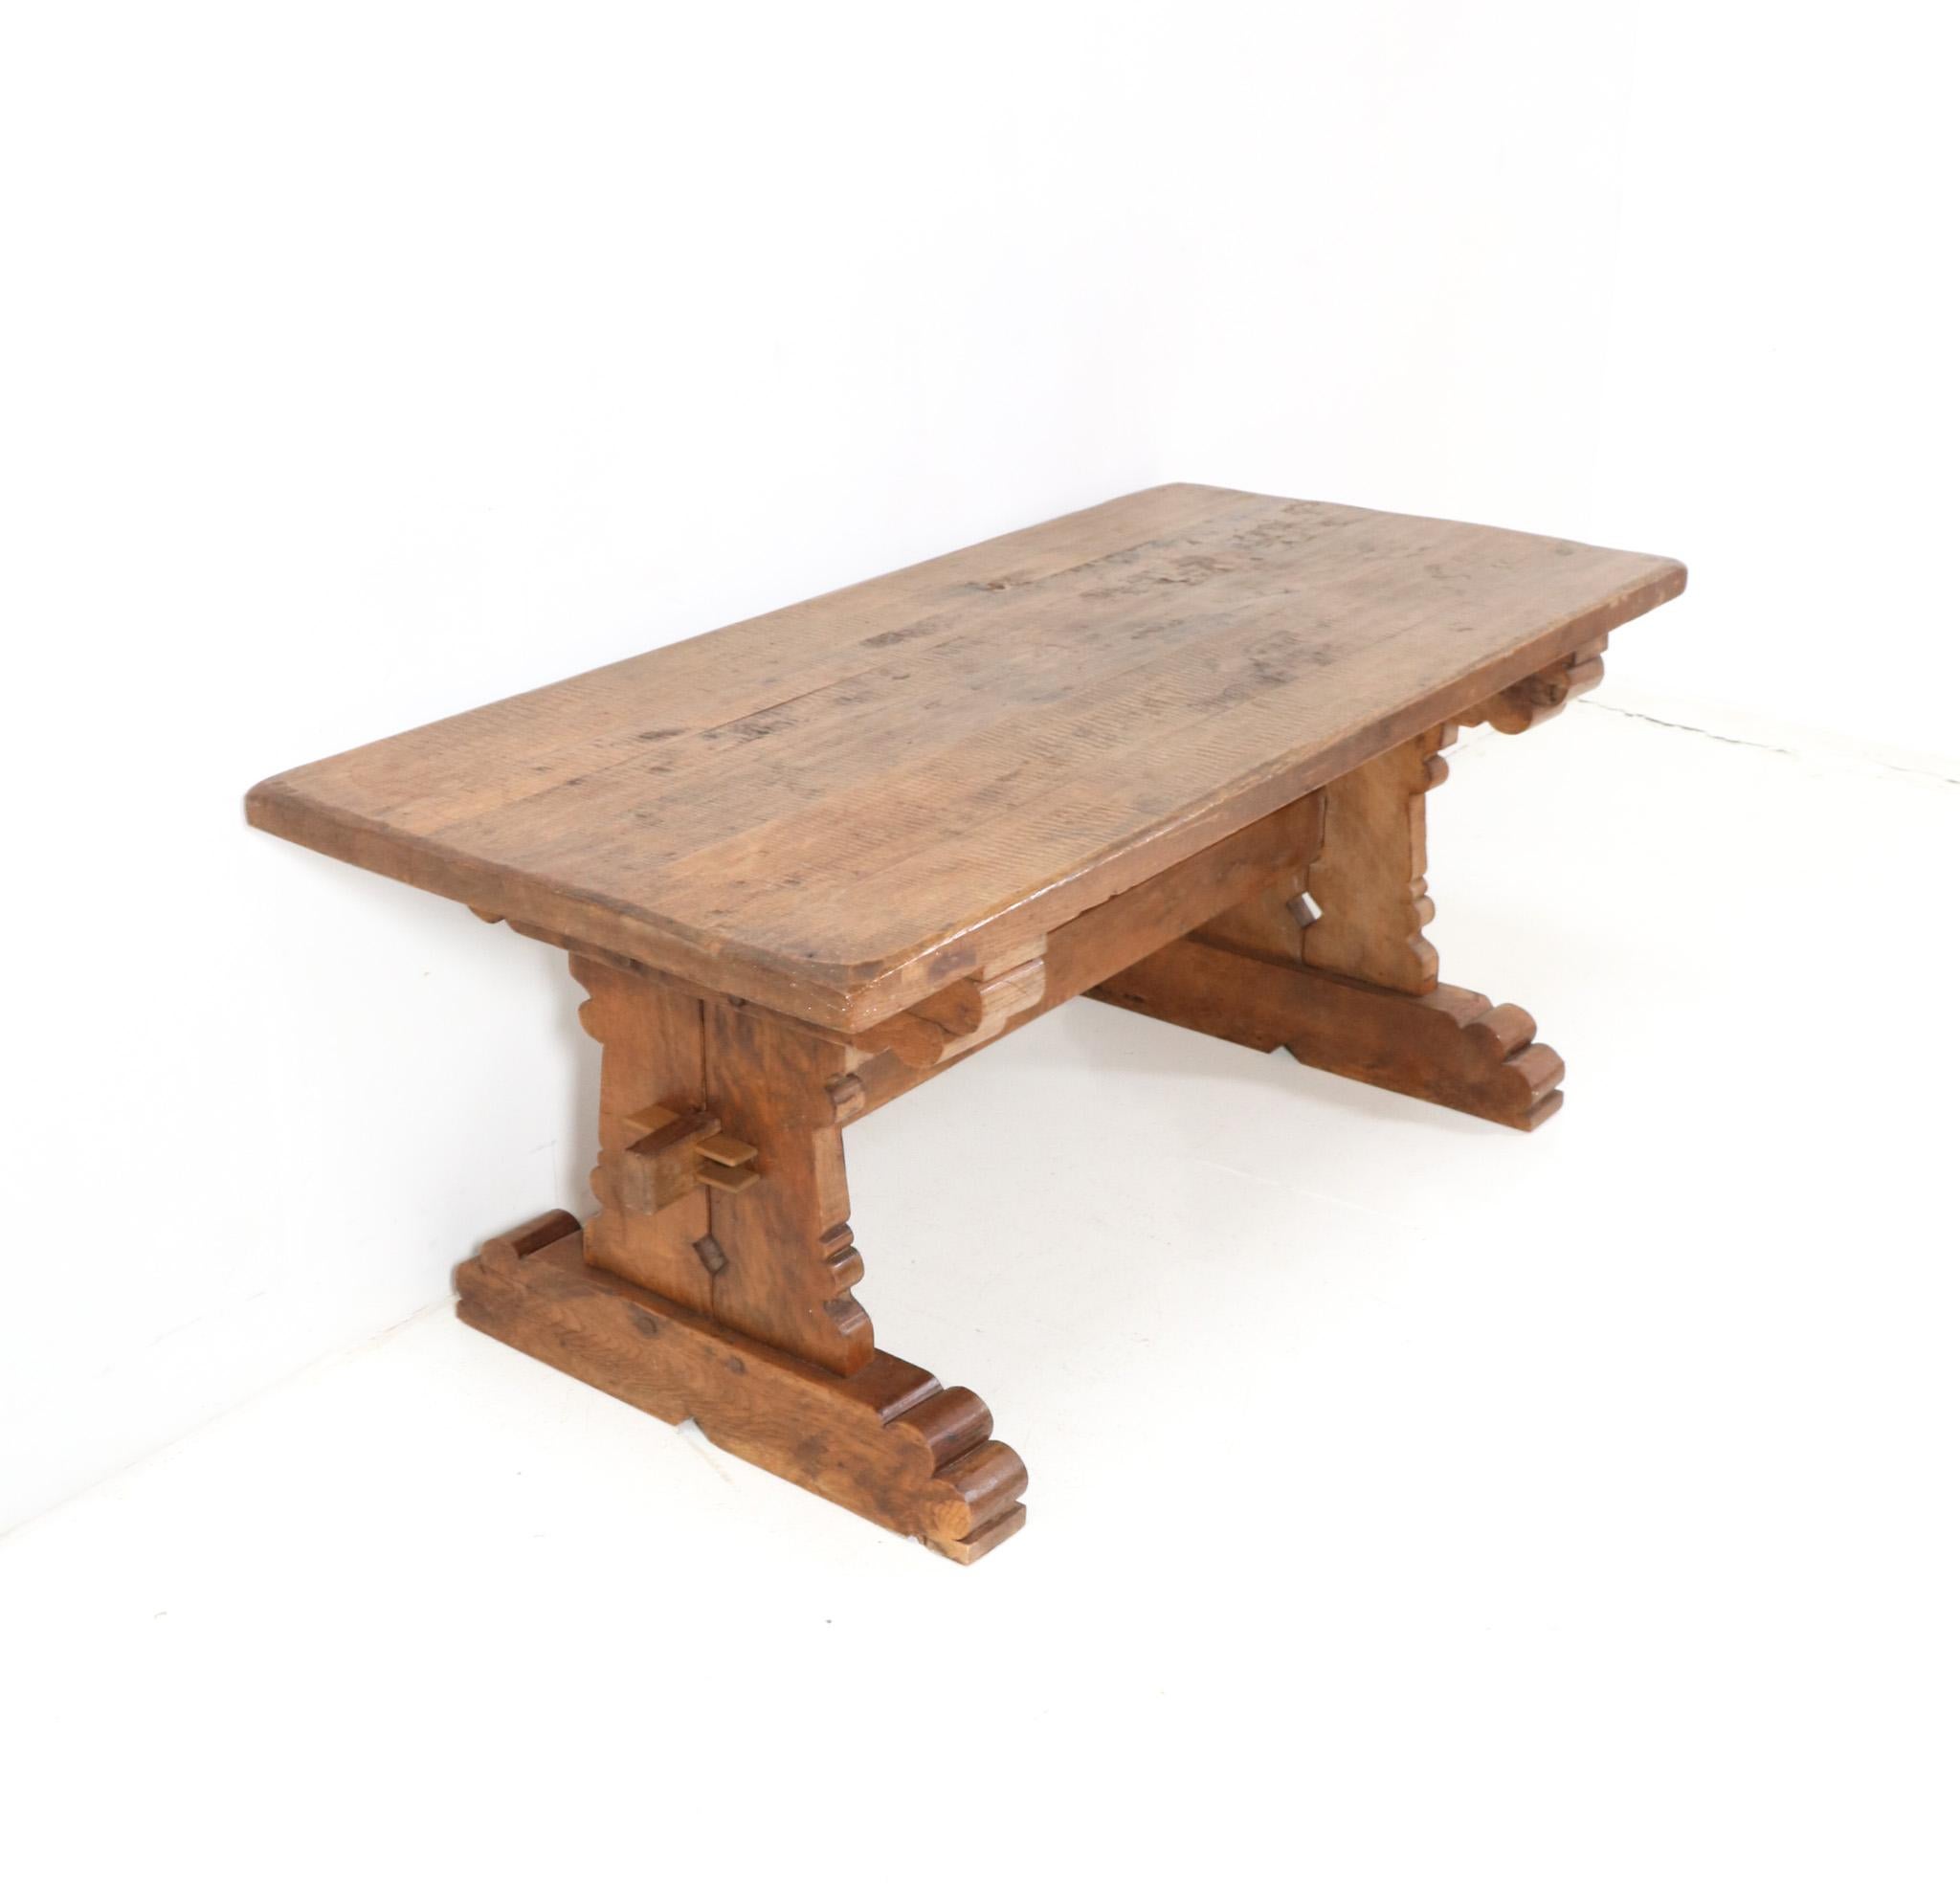 Late 20th Century Oak Brutalist Dining Room Table or Refectory Table, 1970s For Sale